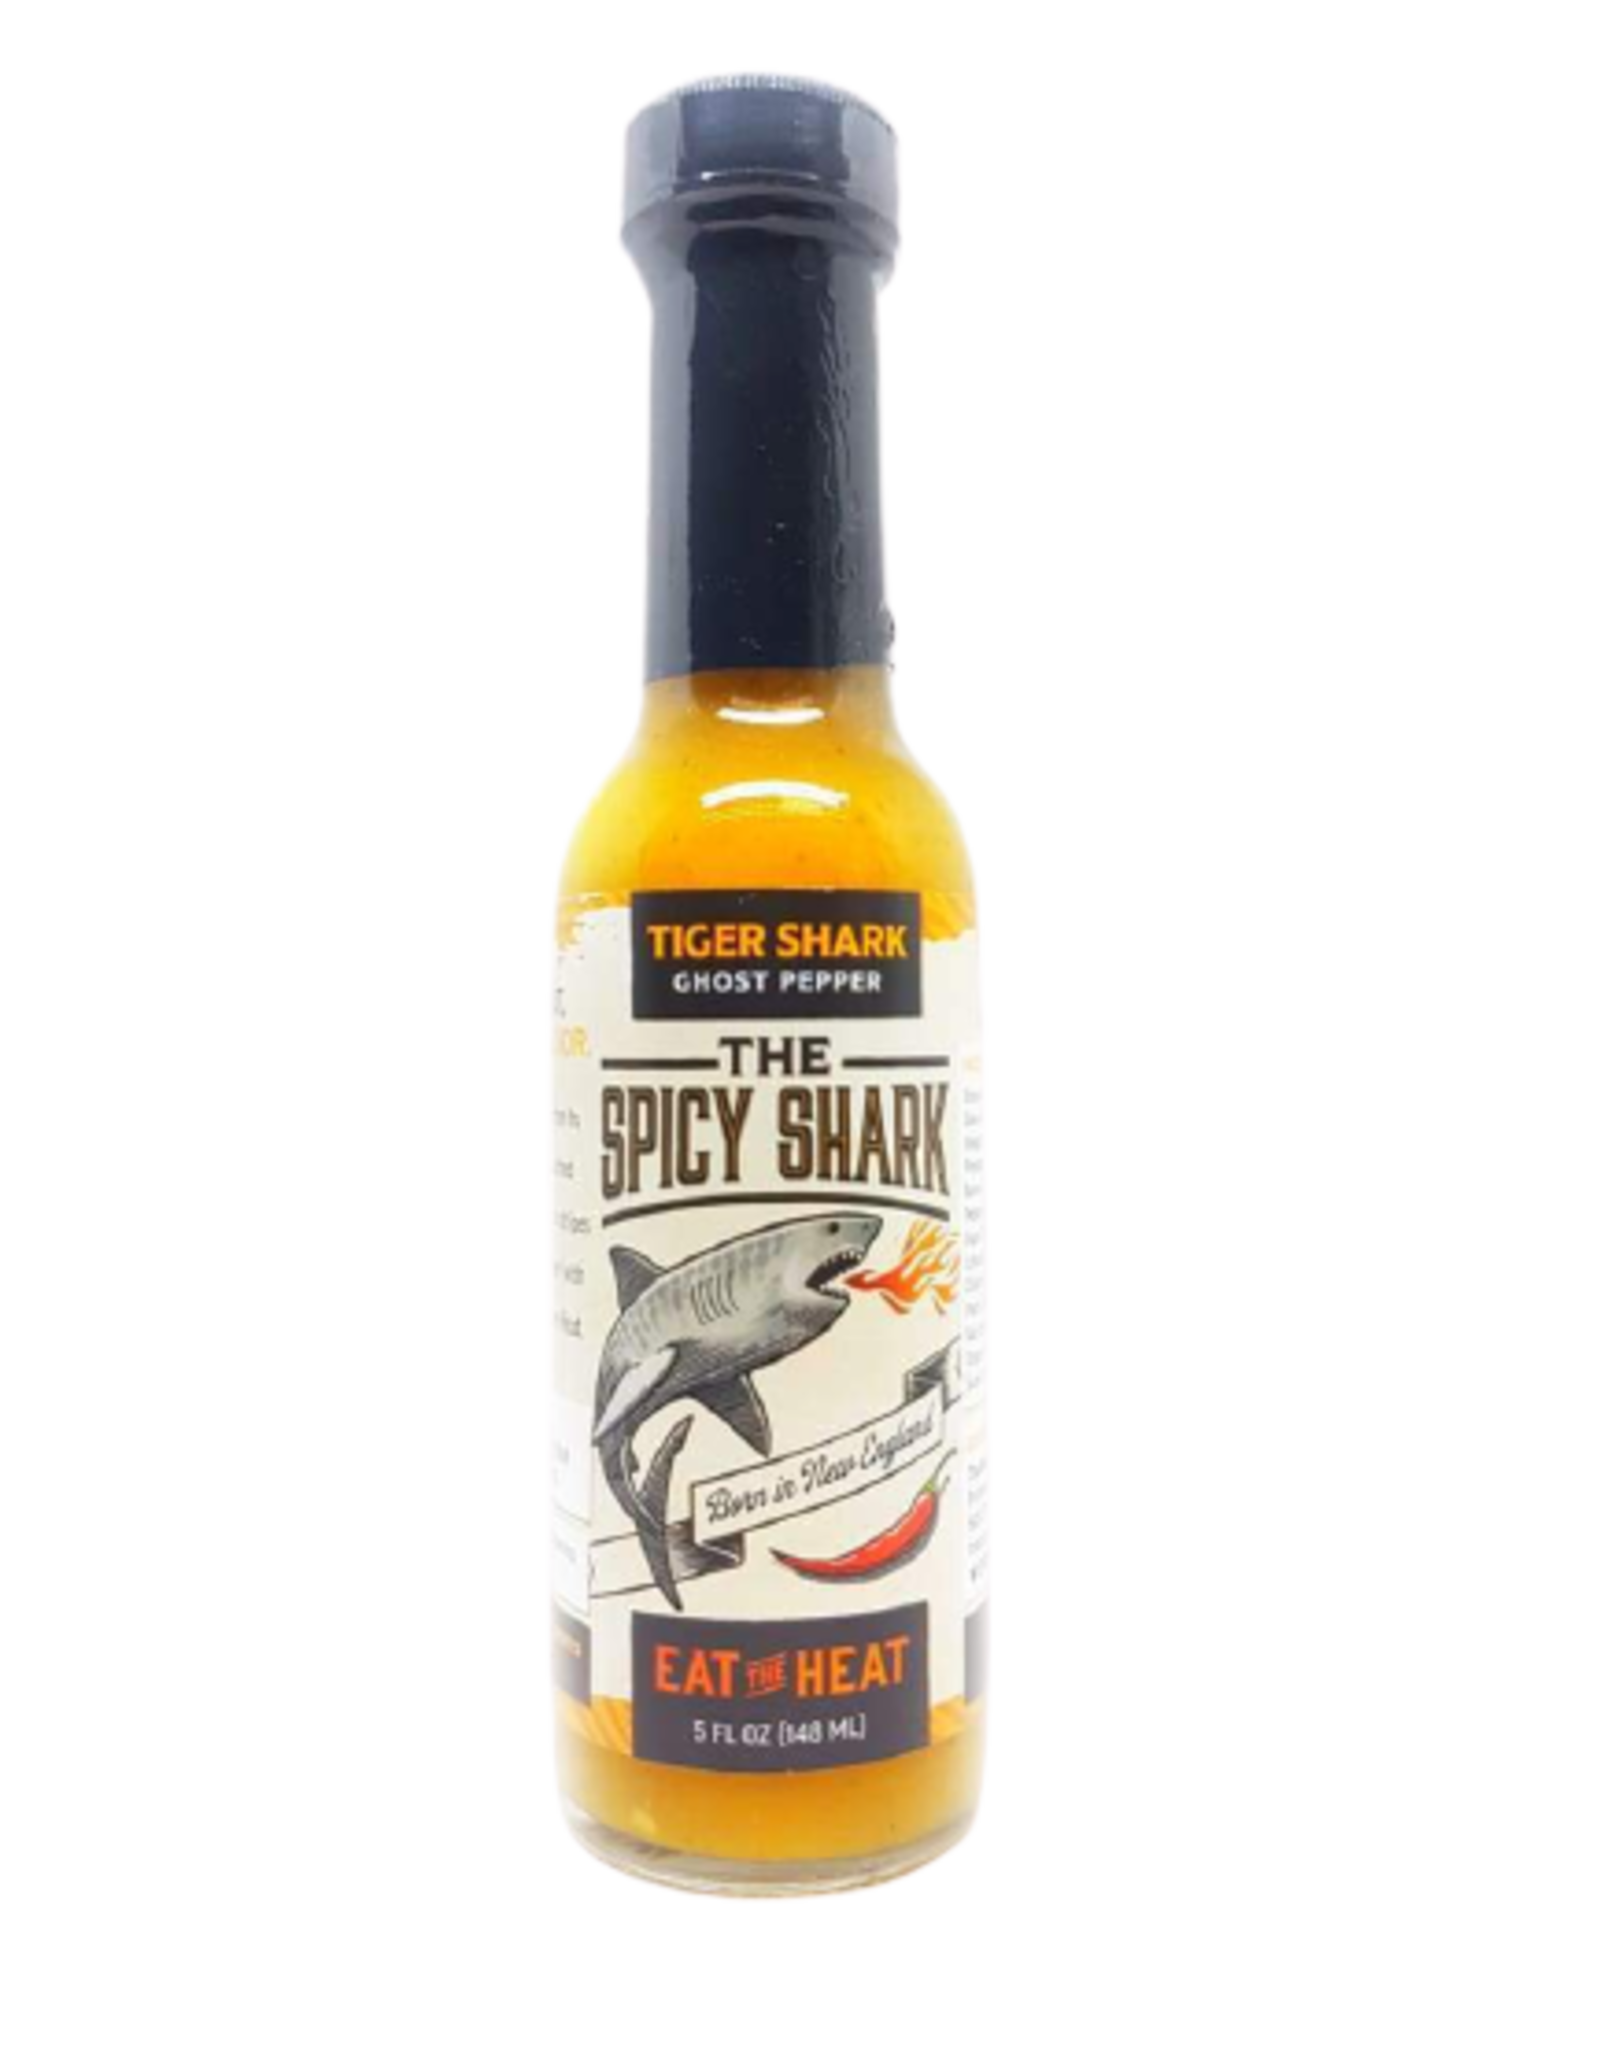 The Spicy Shark Tiger Shark Ghost Pepper